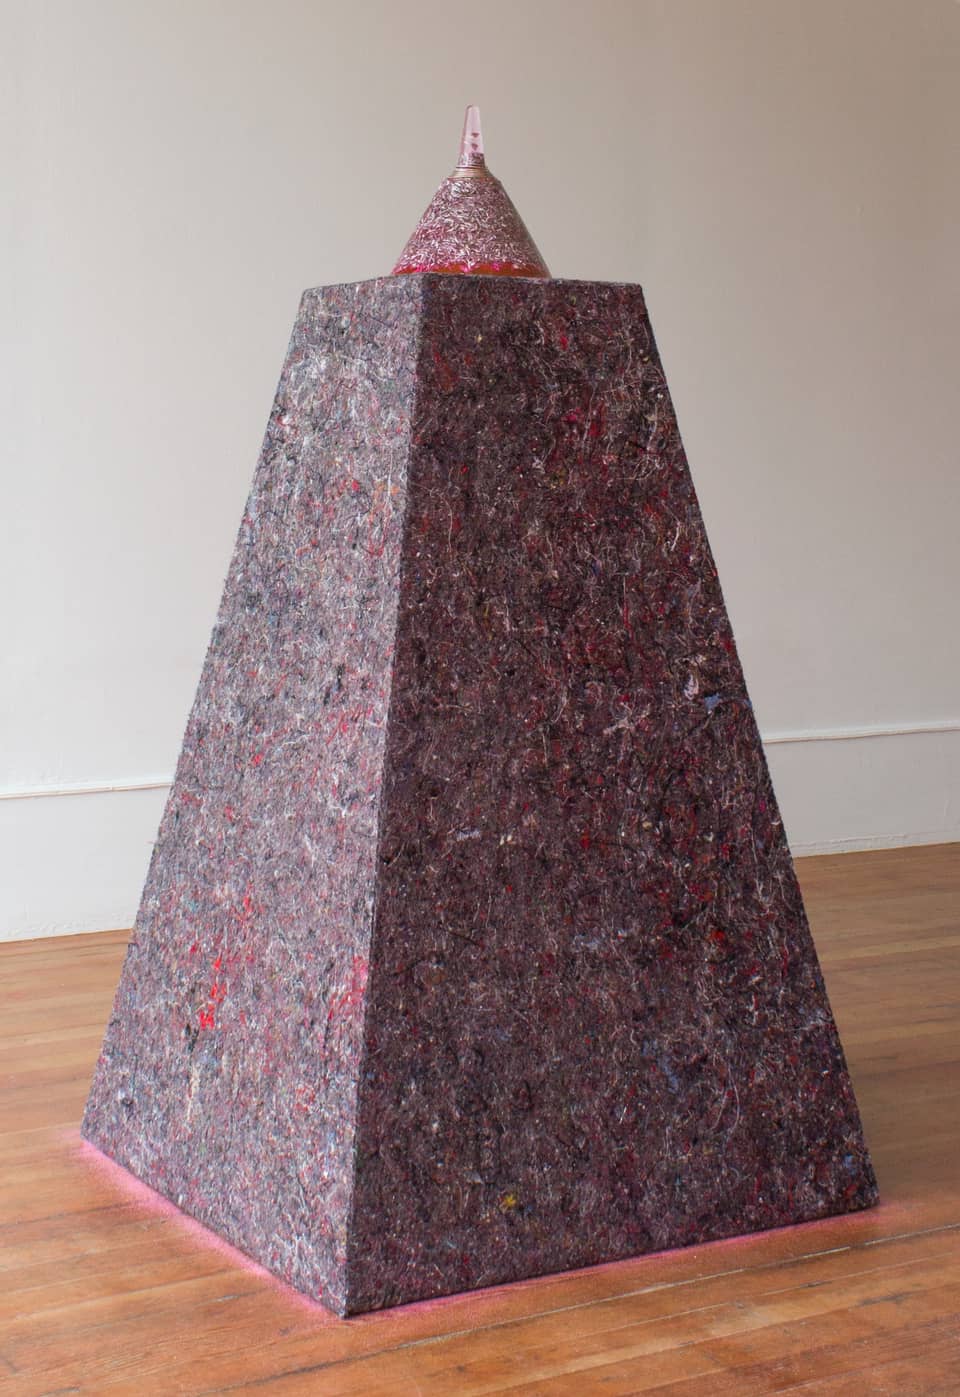 Tinted resin cone on matching plinth